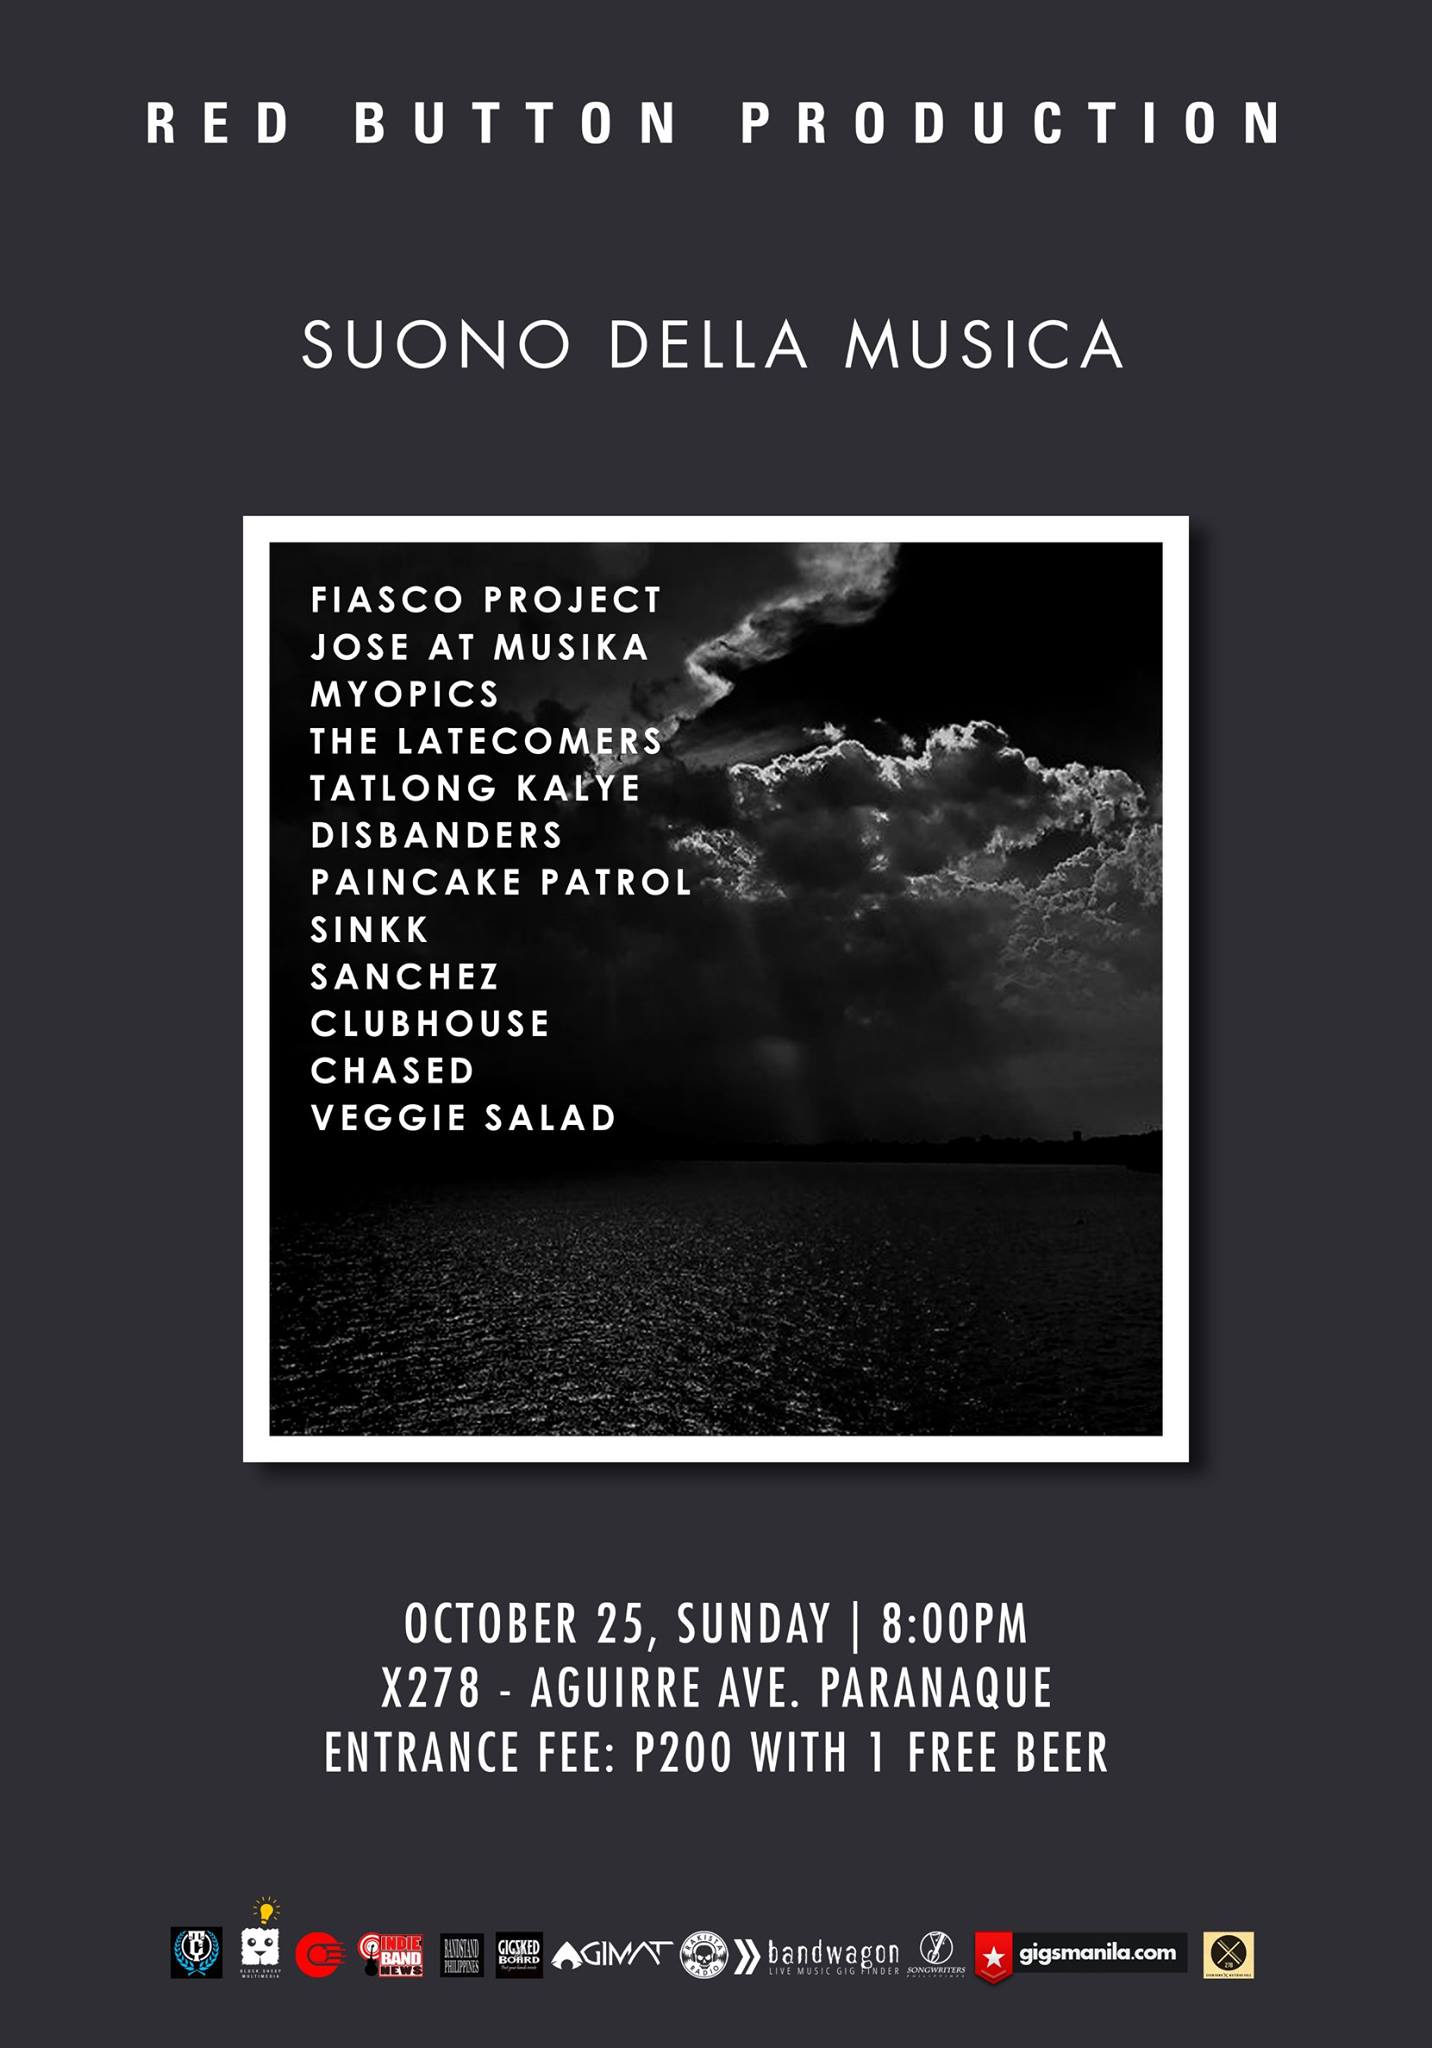 Sunday, October 25 Red Button Production "SUONO DELLA MUSICA" October 25, Sunday | 8:00PM x278 - aguirre ave. paranaque Entrance Fee: P200 with 1 free beer performances by: Fiasco Project Jose at Musika Myopics The LateComers Tatlong Kalye Disbanders Paincake Patrol SINKK Sanchez Clubhouse Chased Veggie Salad Event Link: https://www.facebook.com/events/1500189746948139/